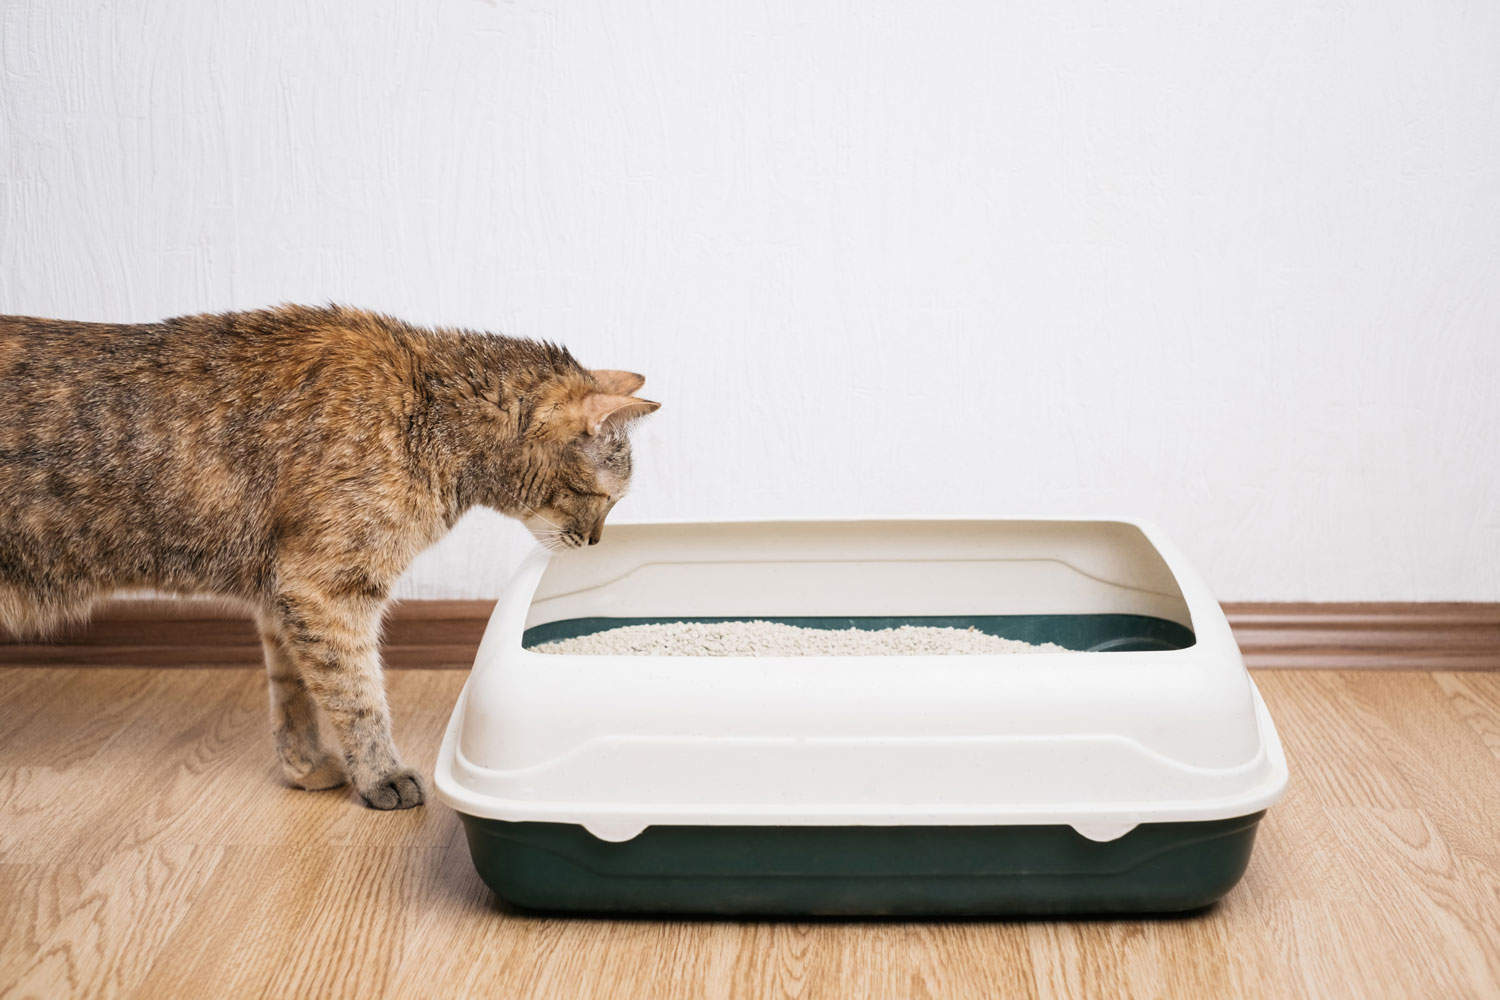 A domestic feral ginger cat is observing the litter box as part of its training.